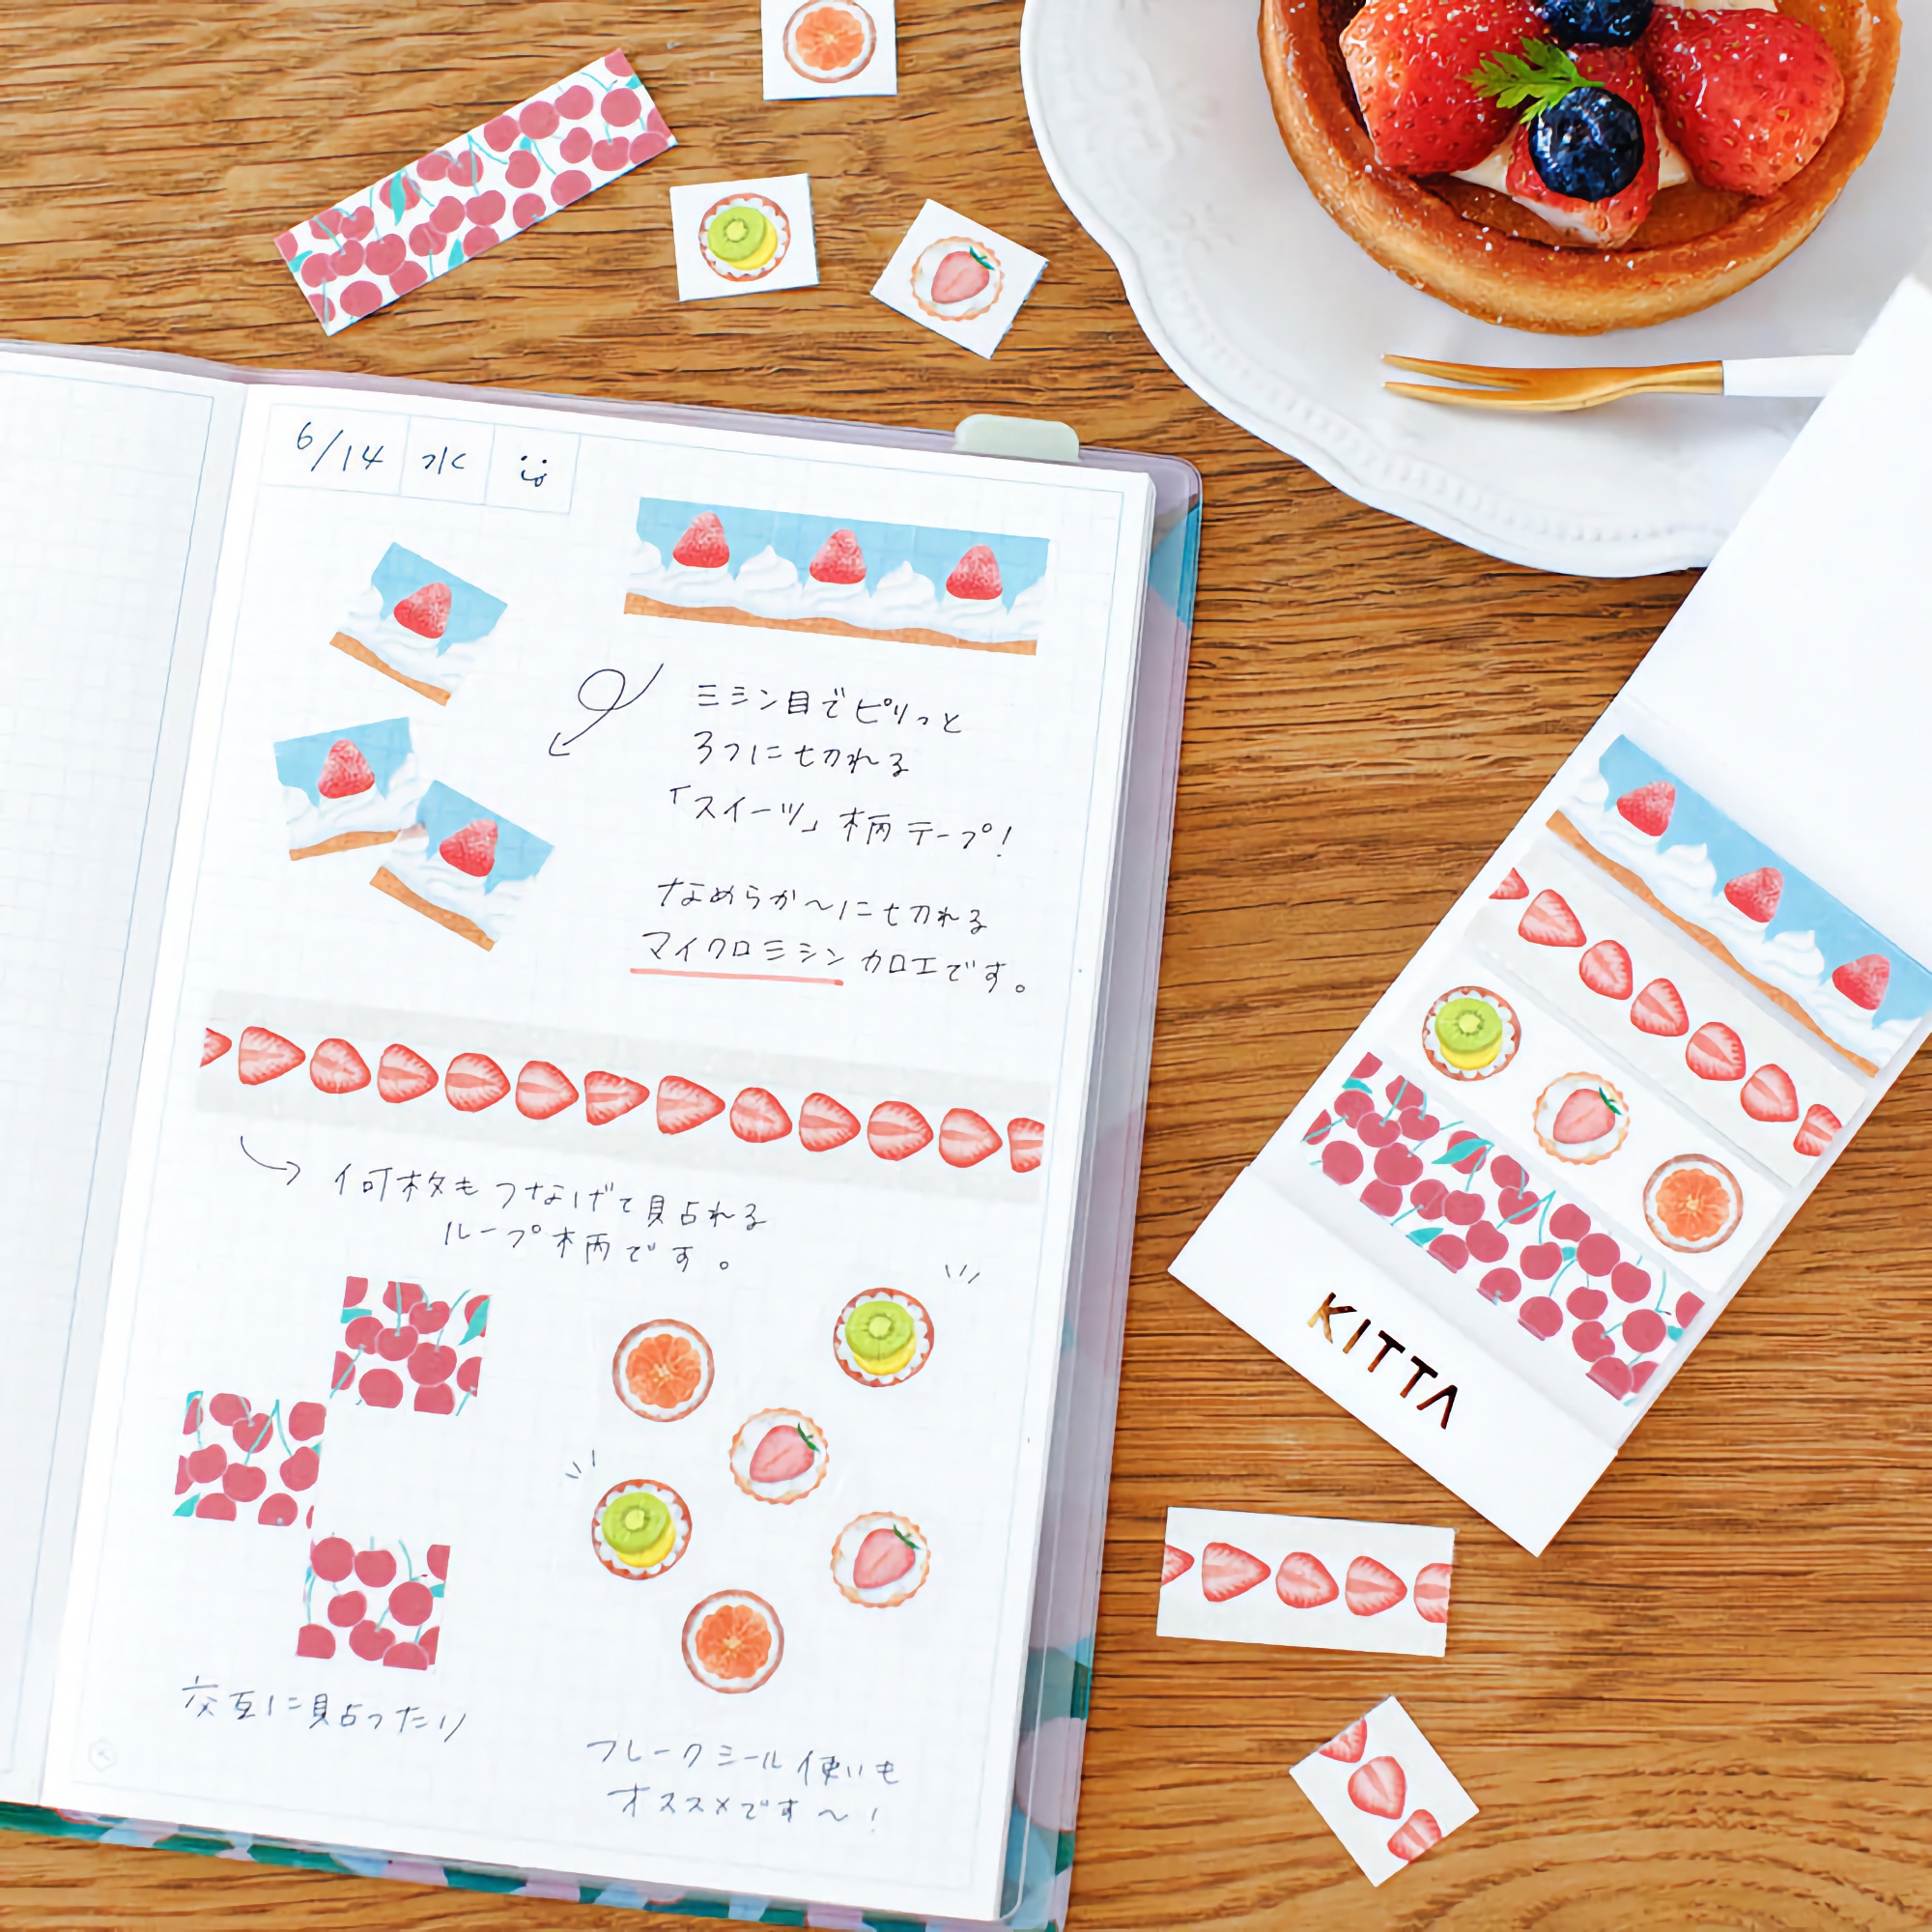 KITTA Sweets Perforated Washi Tape